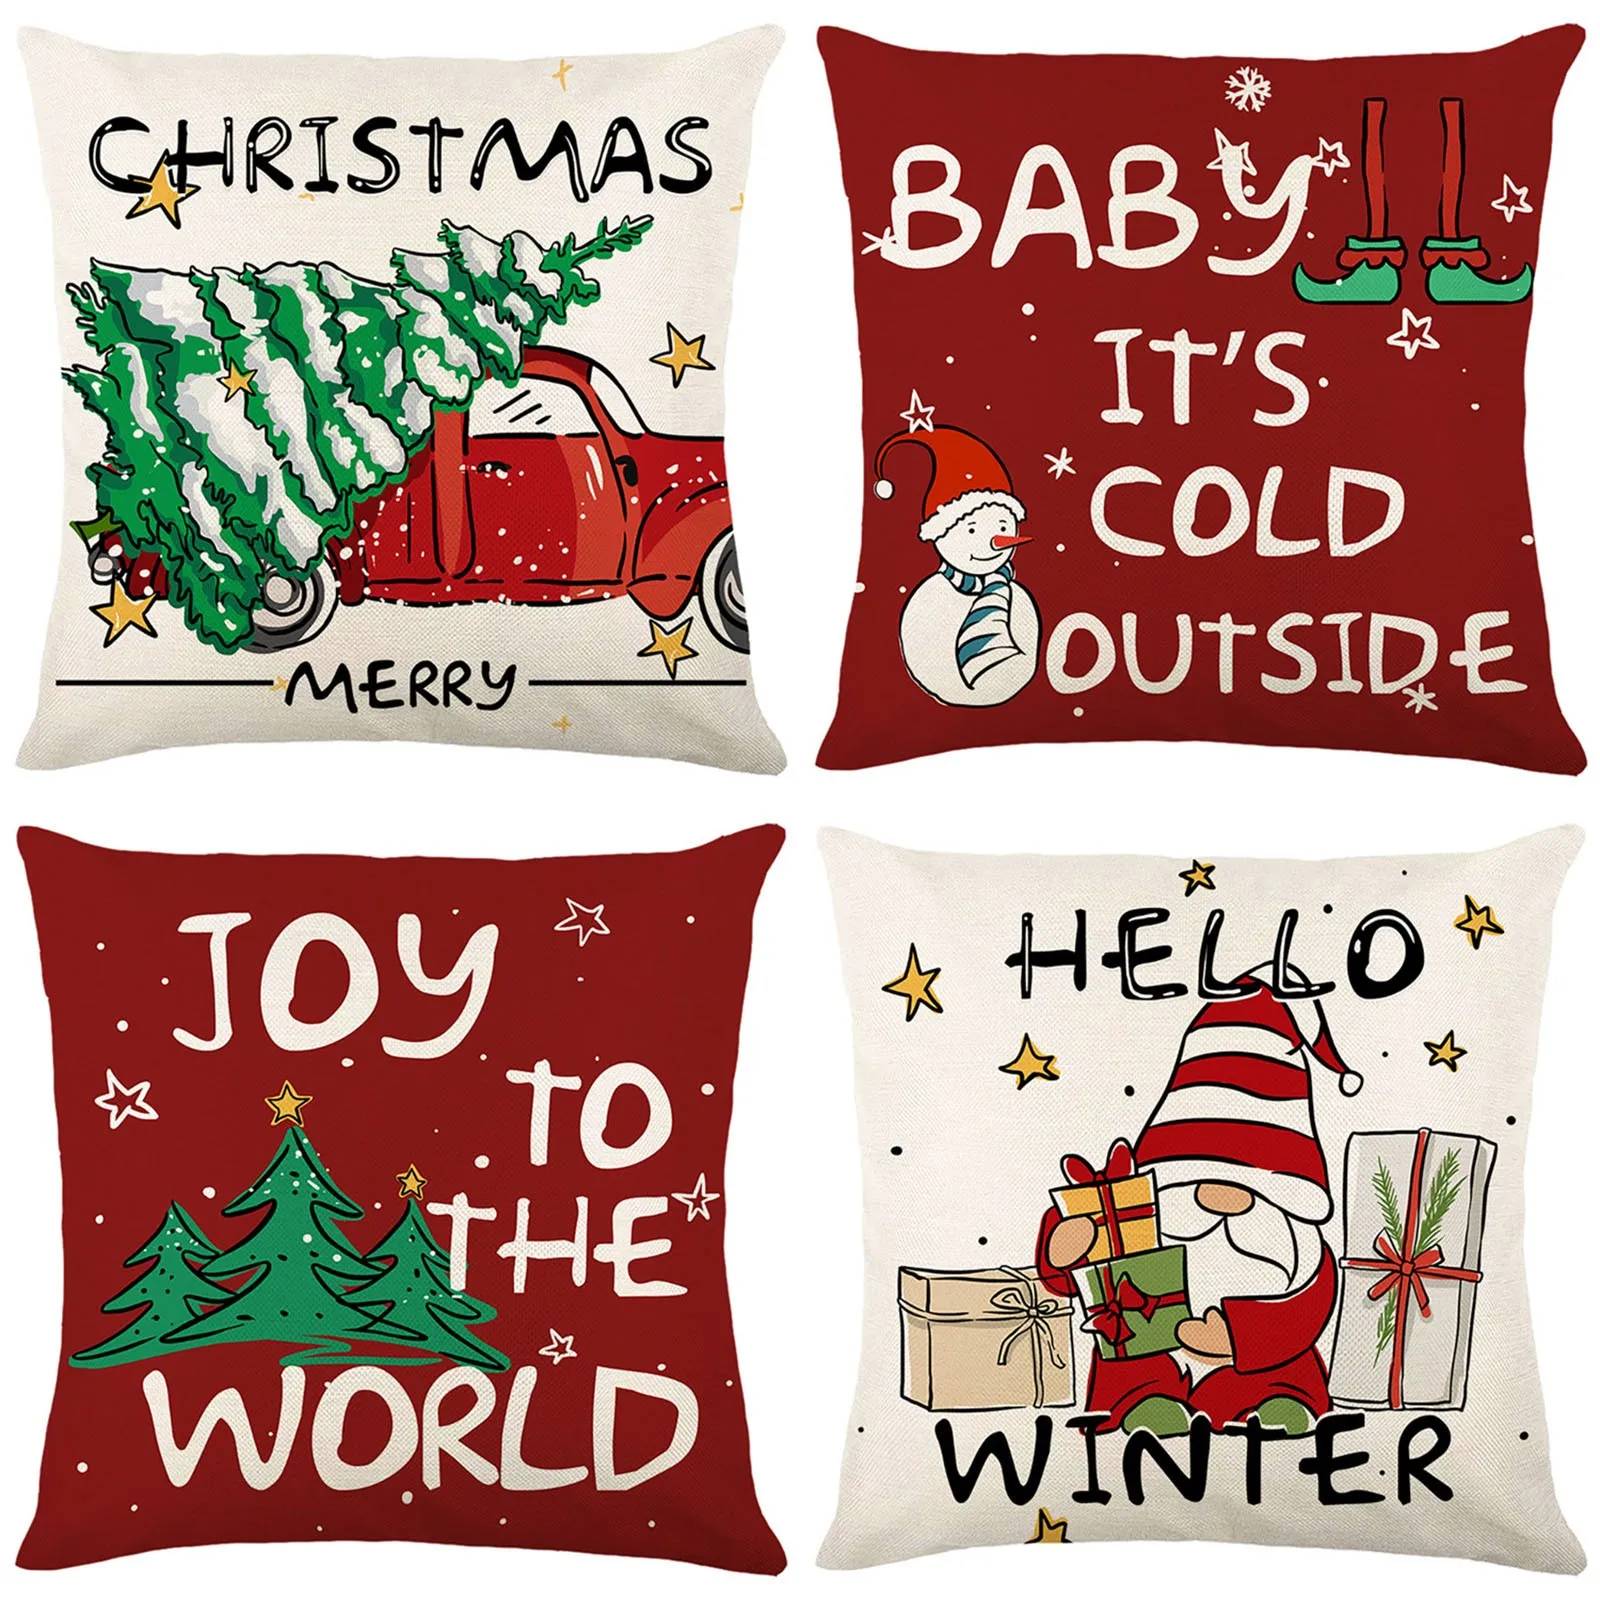 

45cm Merry Christmas Cushion Cover Pillowcase 2022 Christmas Decorations For Home Ornament Happy New Year Christmas Decor 2023